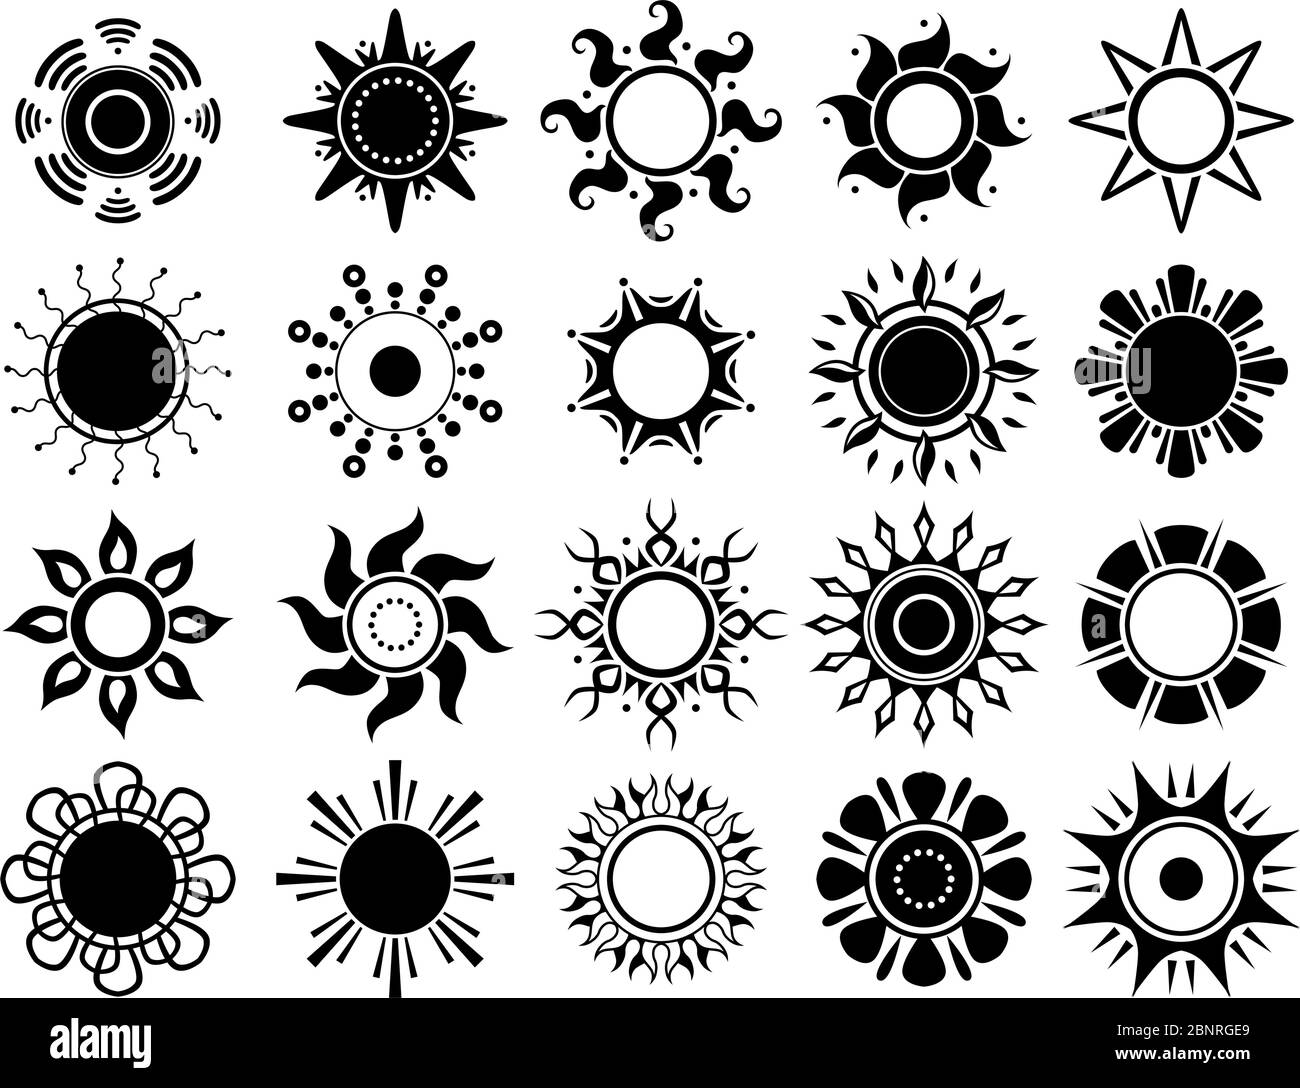 Sun silhouettes icon. Weather summers hot sunshine black graphic symbols vector isolated Stock Vector